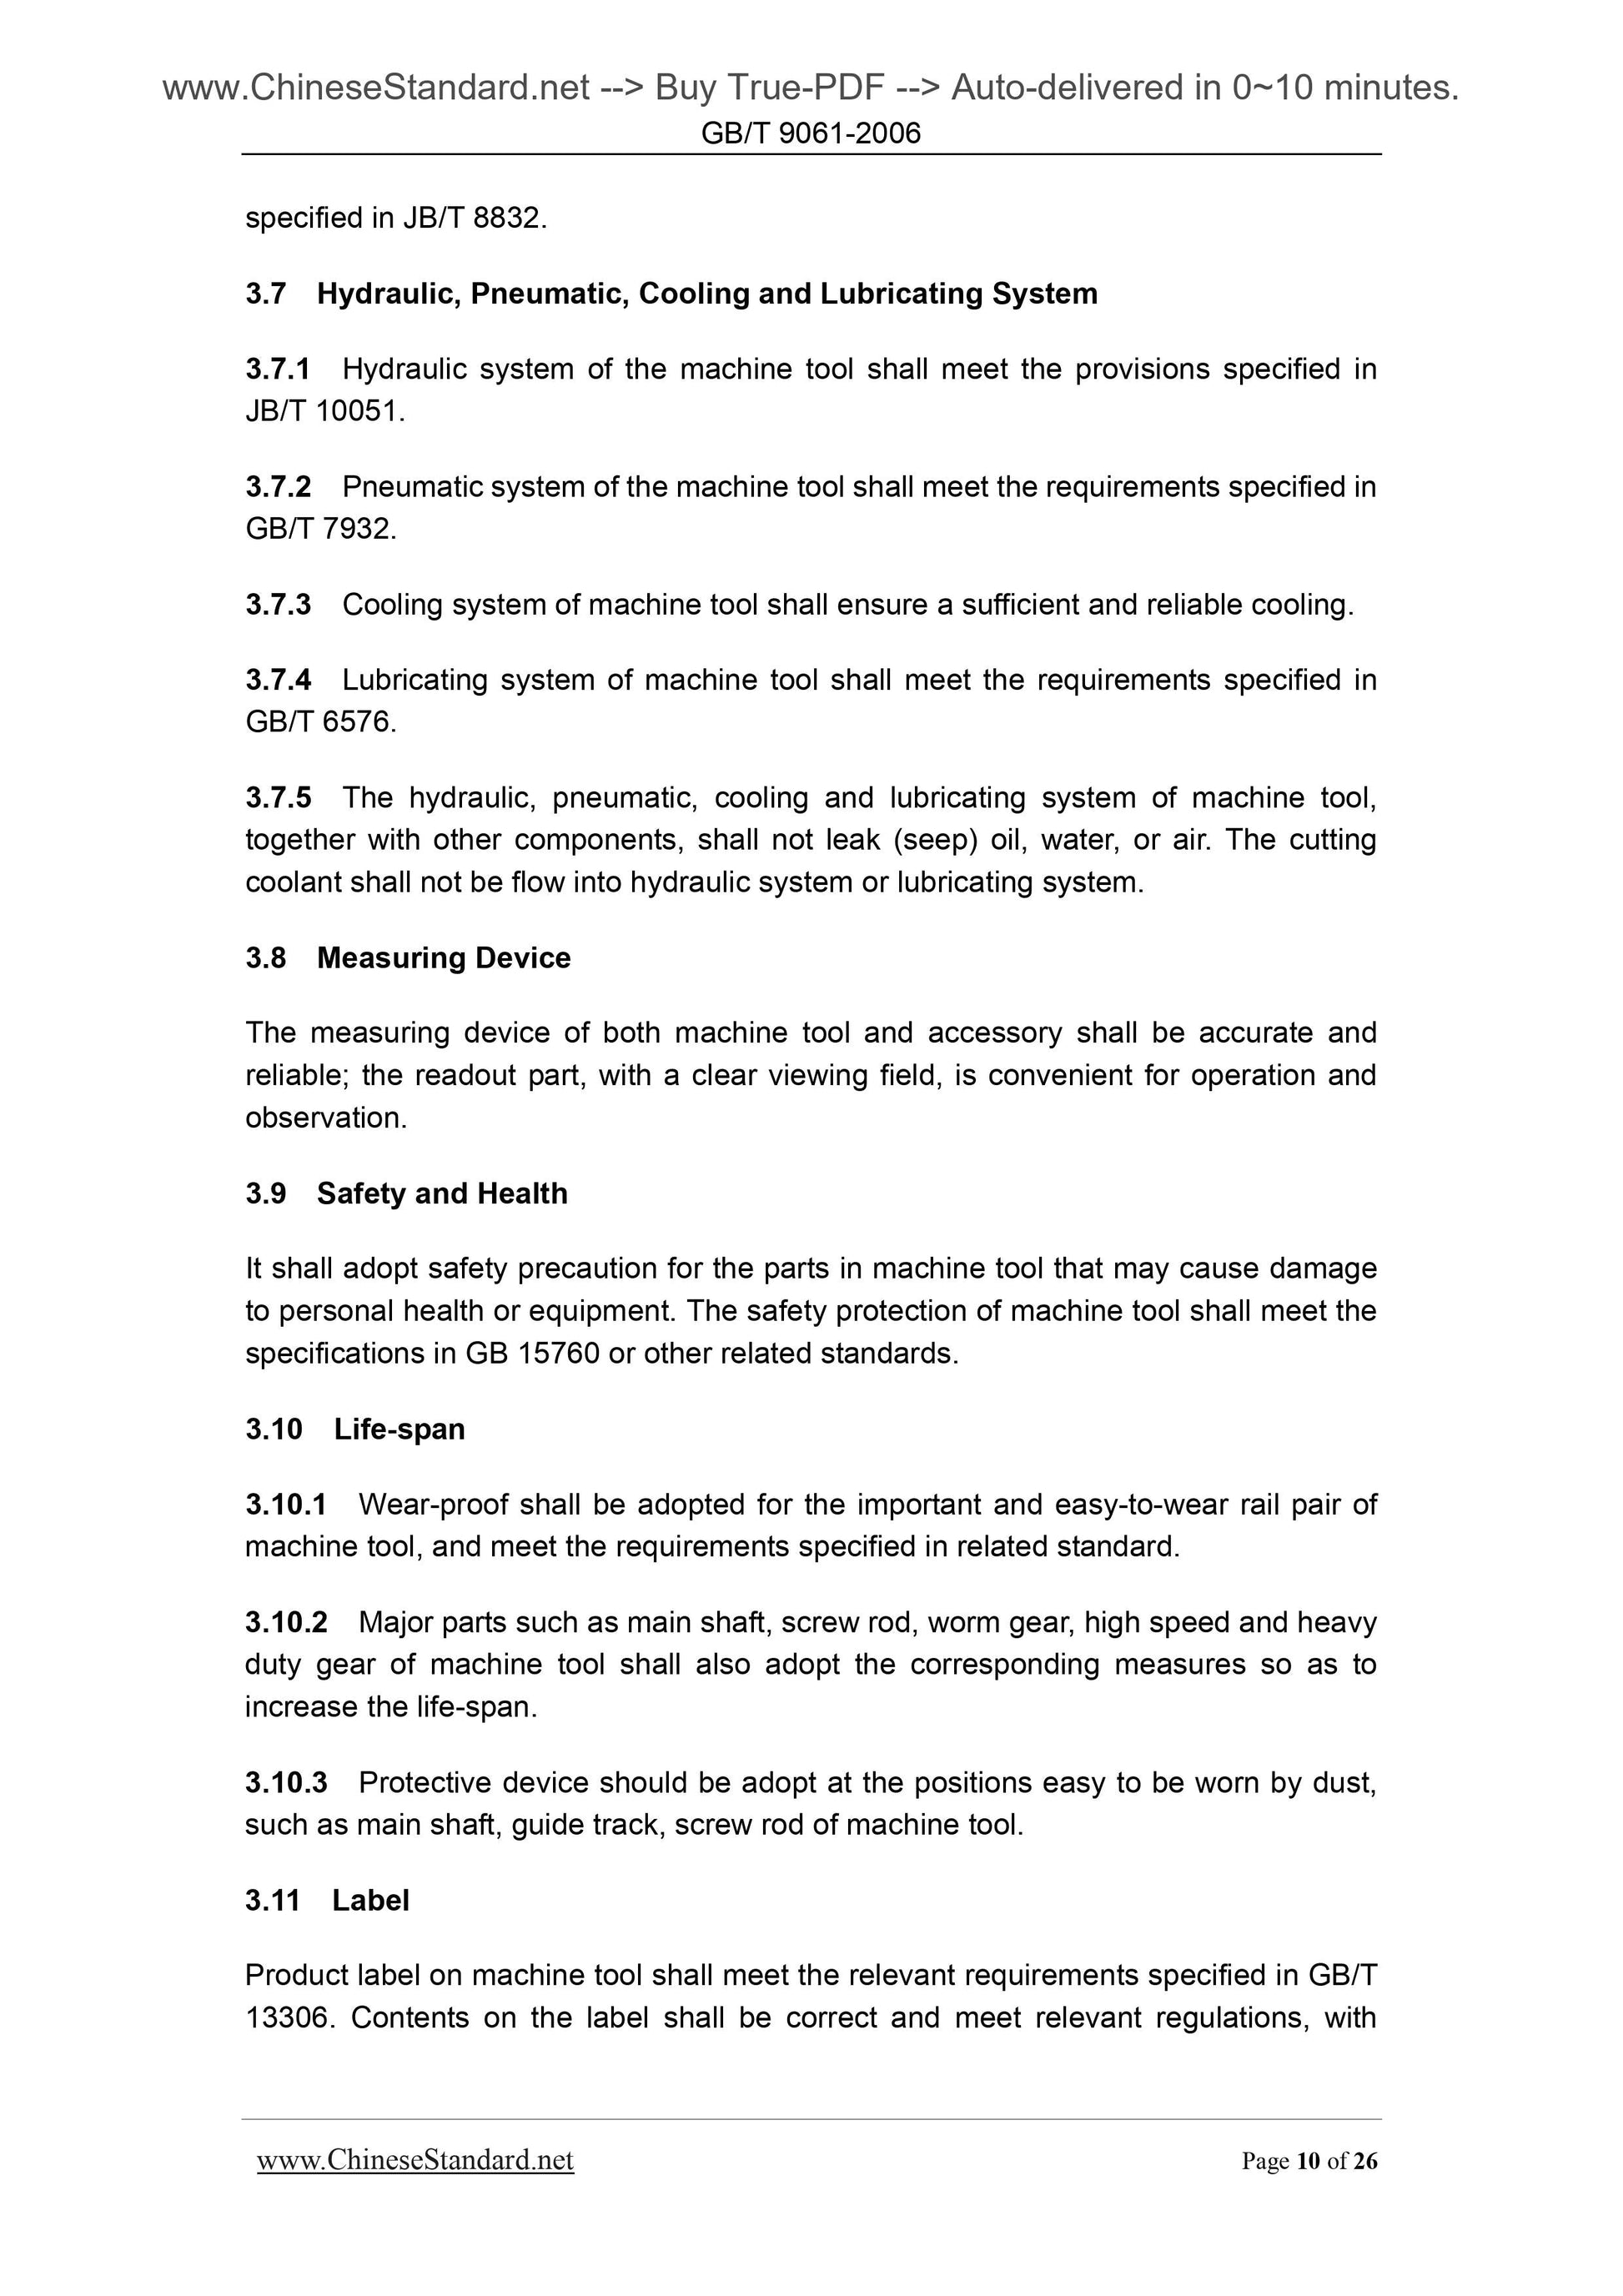 GB/T 9061-2006 Page 8